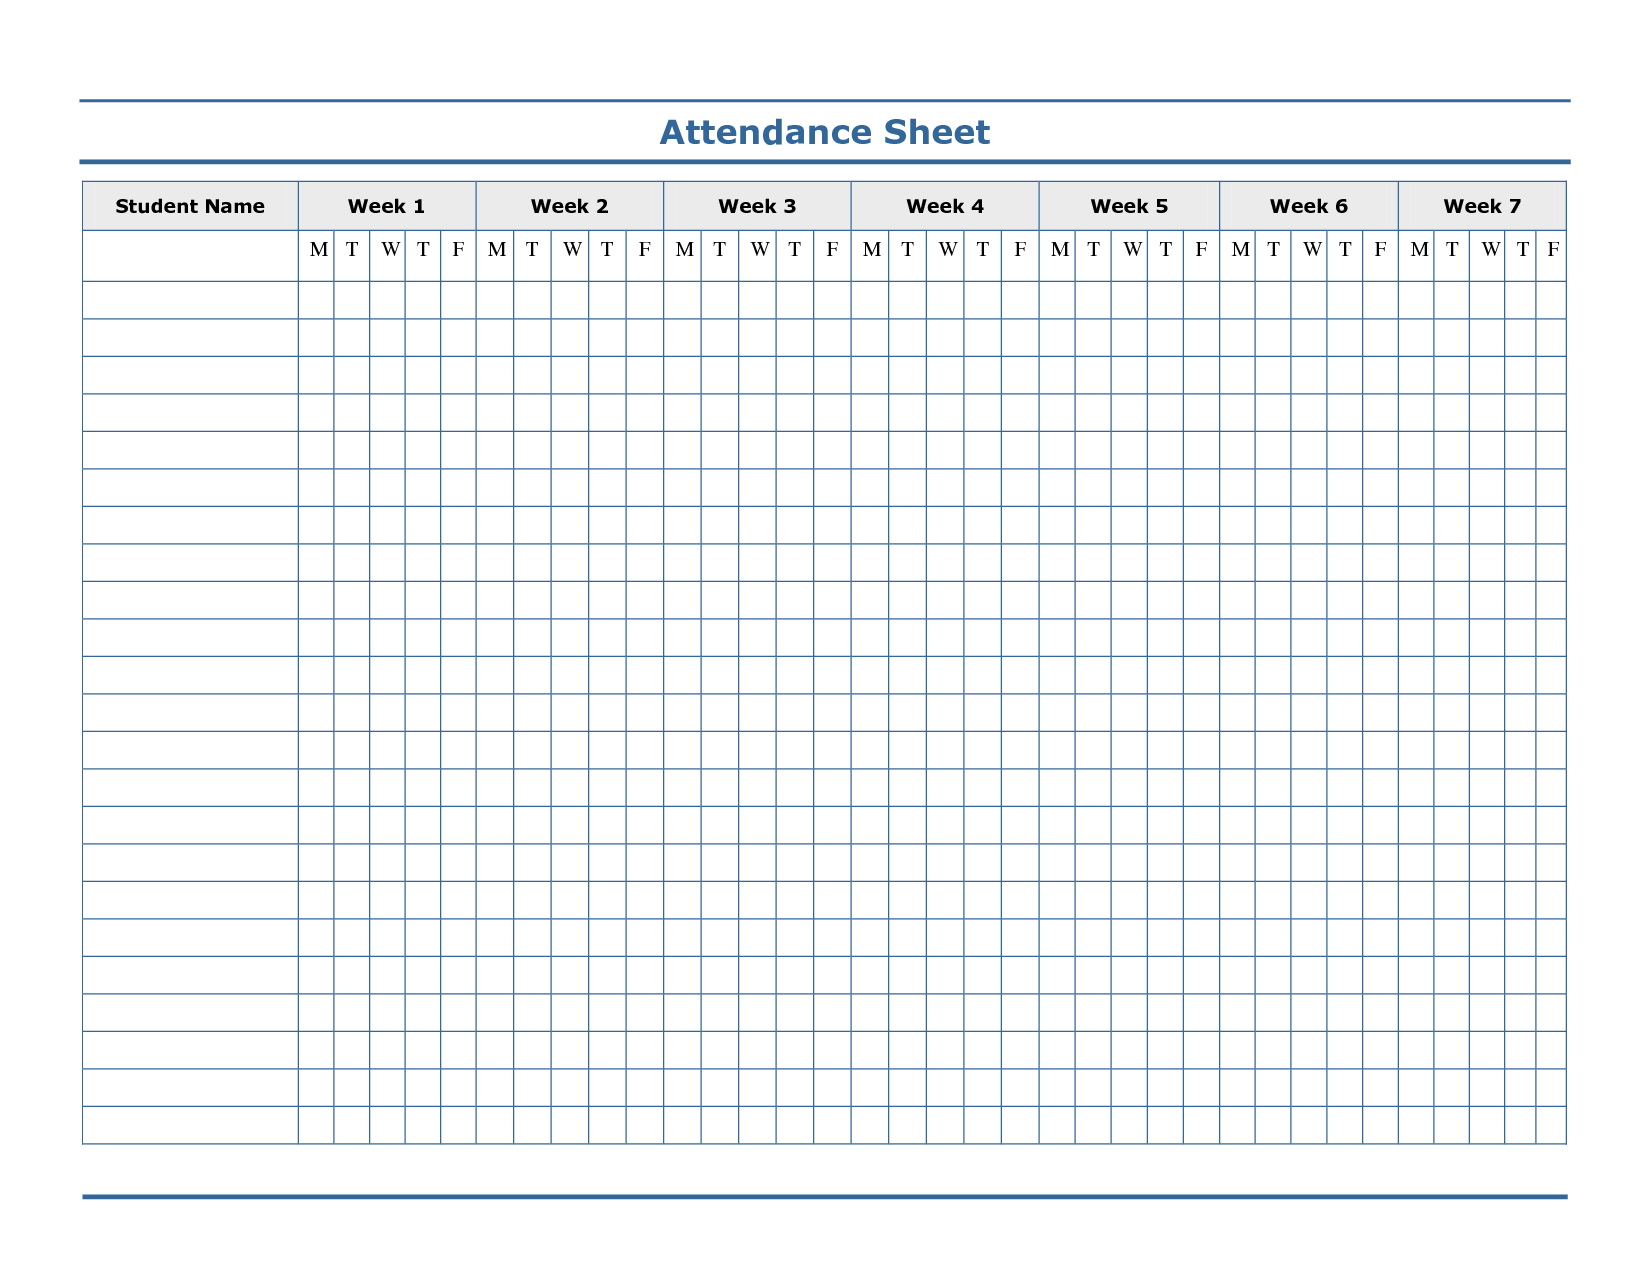 Attendance Tracking Spreadsheet Pertaining To Employee Attendance Tracking Spreadsheet As Well Template With